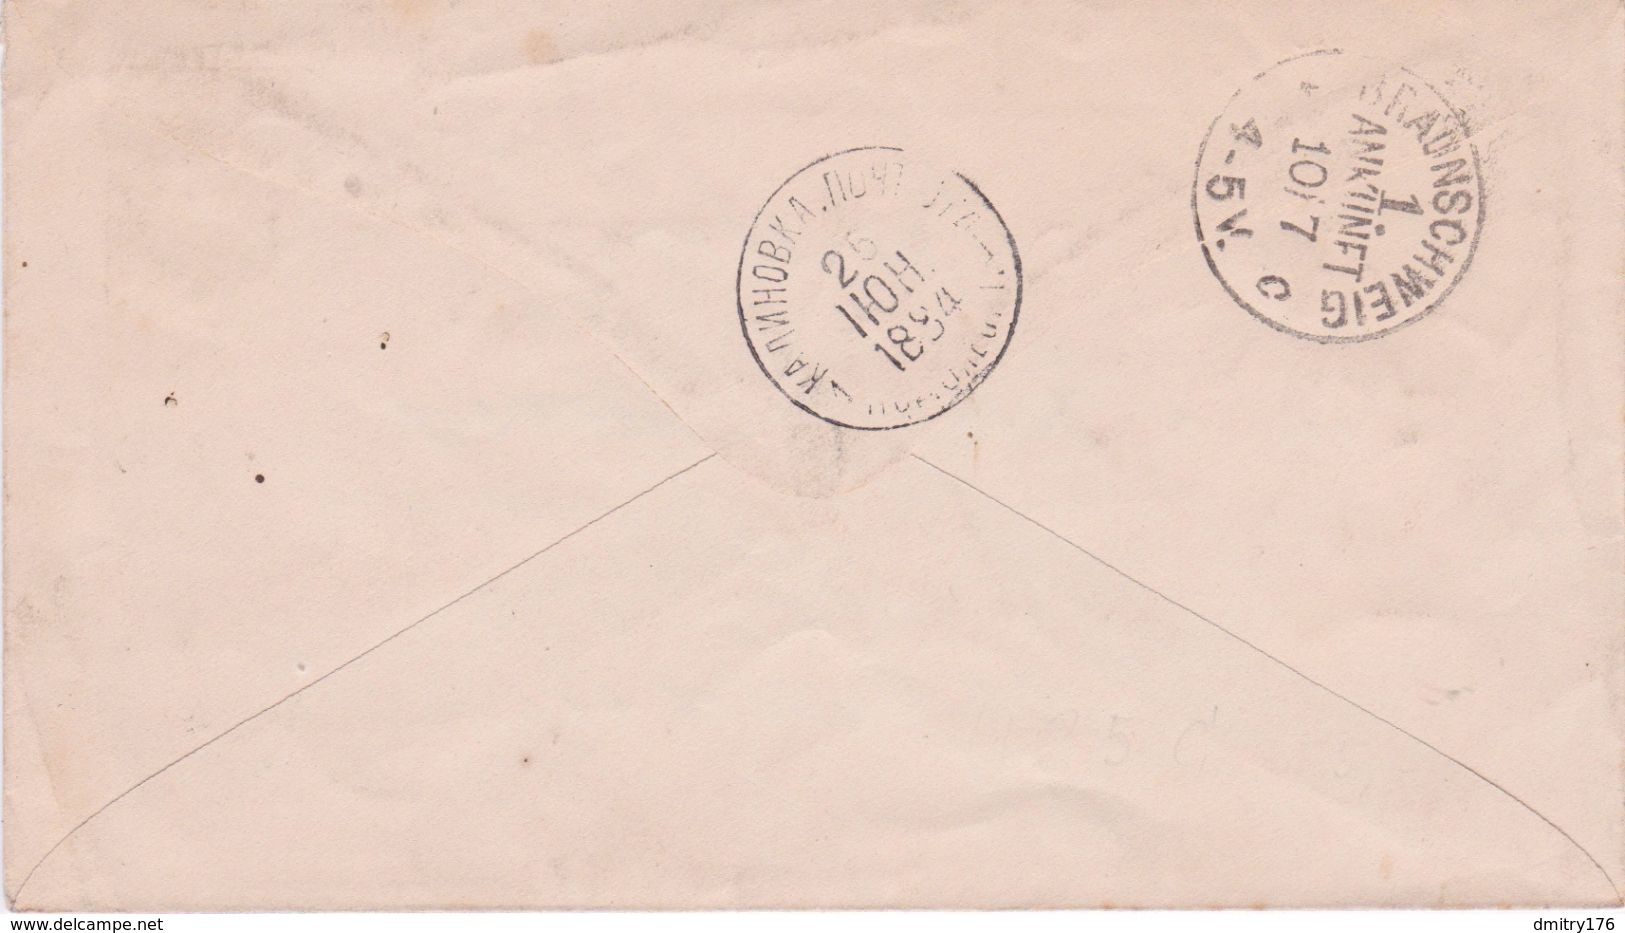 Russia  Postal History To Germany  . Stationary Letter . Kalinovka Podolsk Area . Now Ukraine Delay Dispatch One Day - Unused Stamps